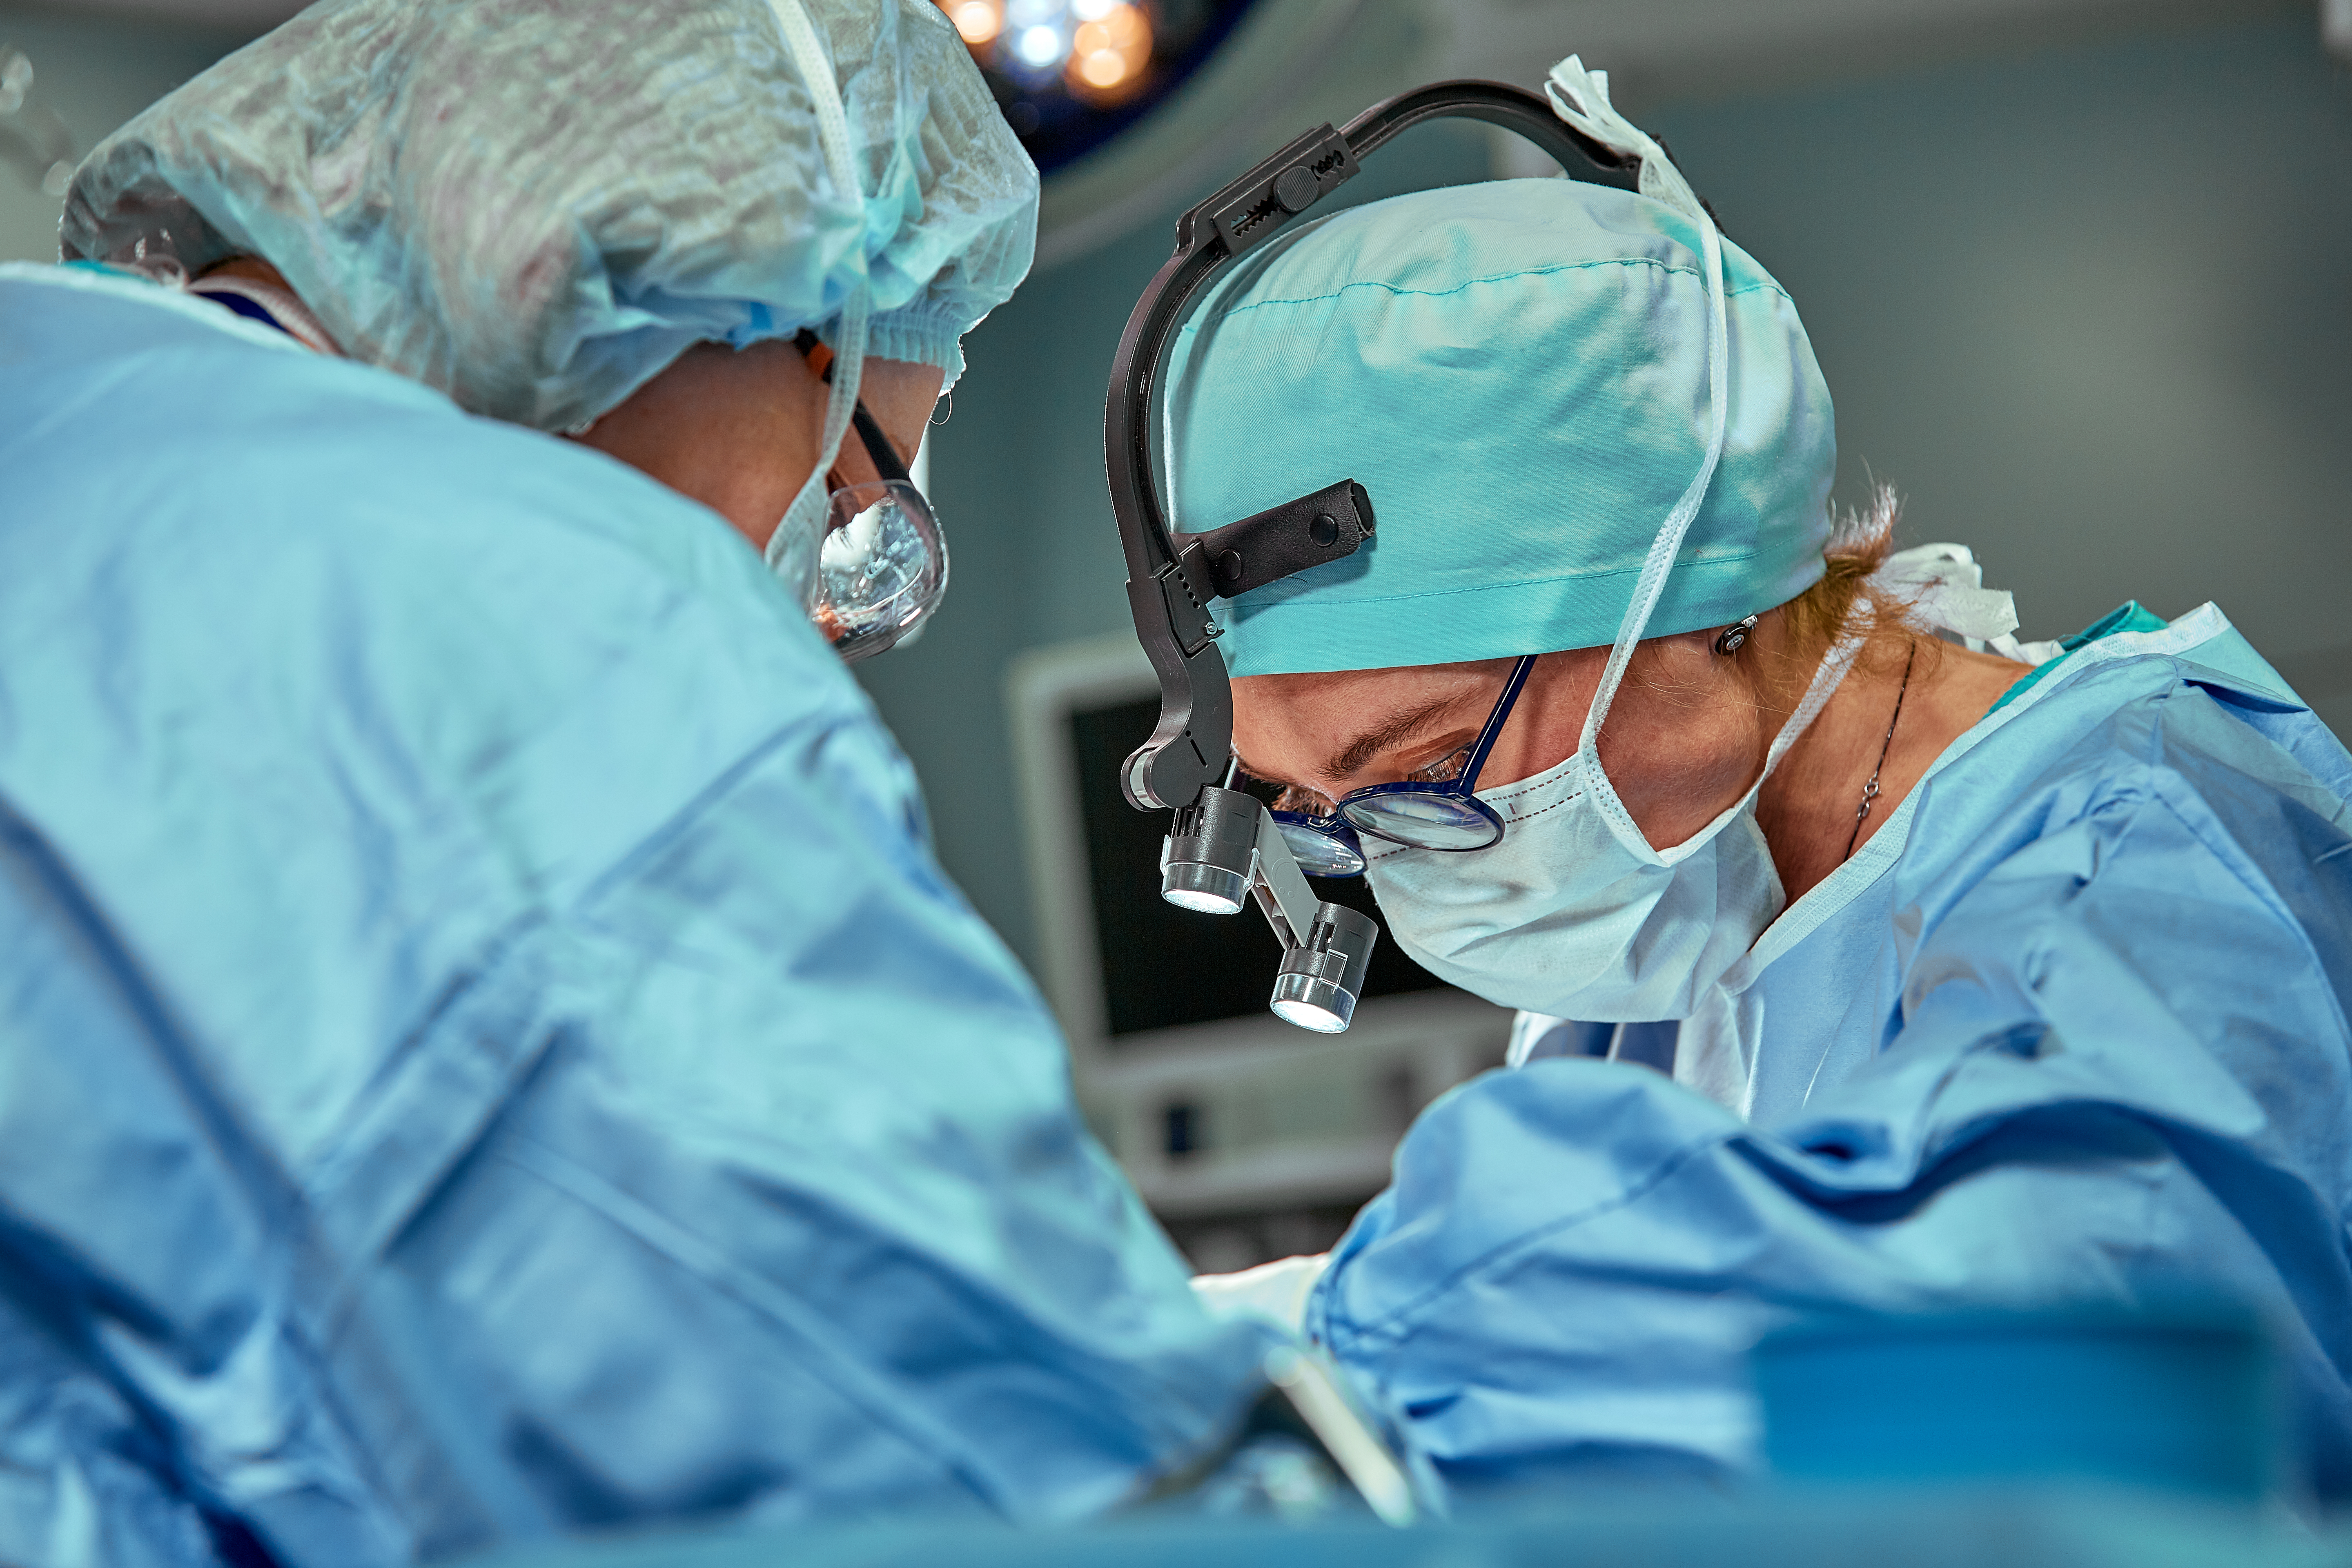 A heart surgeon and an electrophysiologist operate on a heart with persistent AFib.